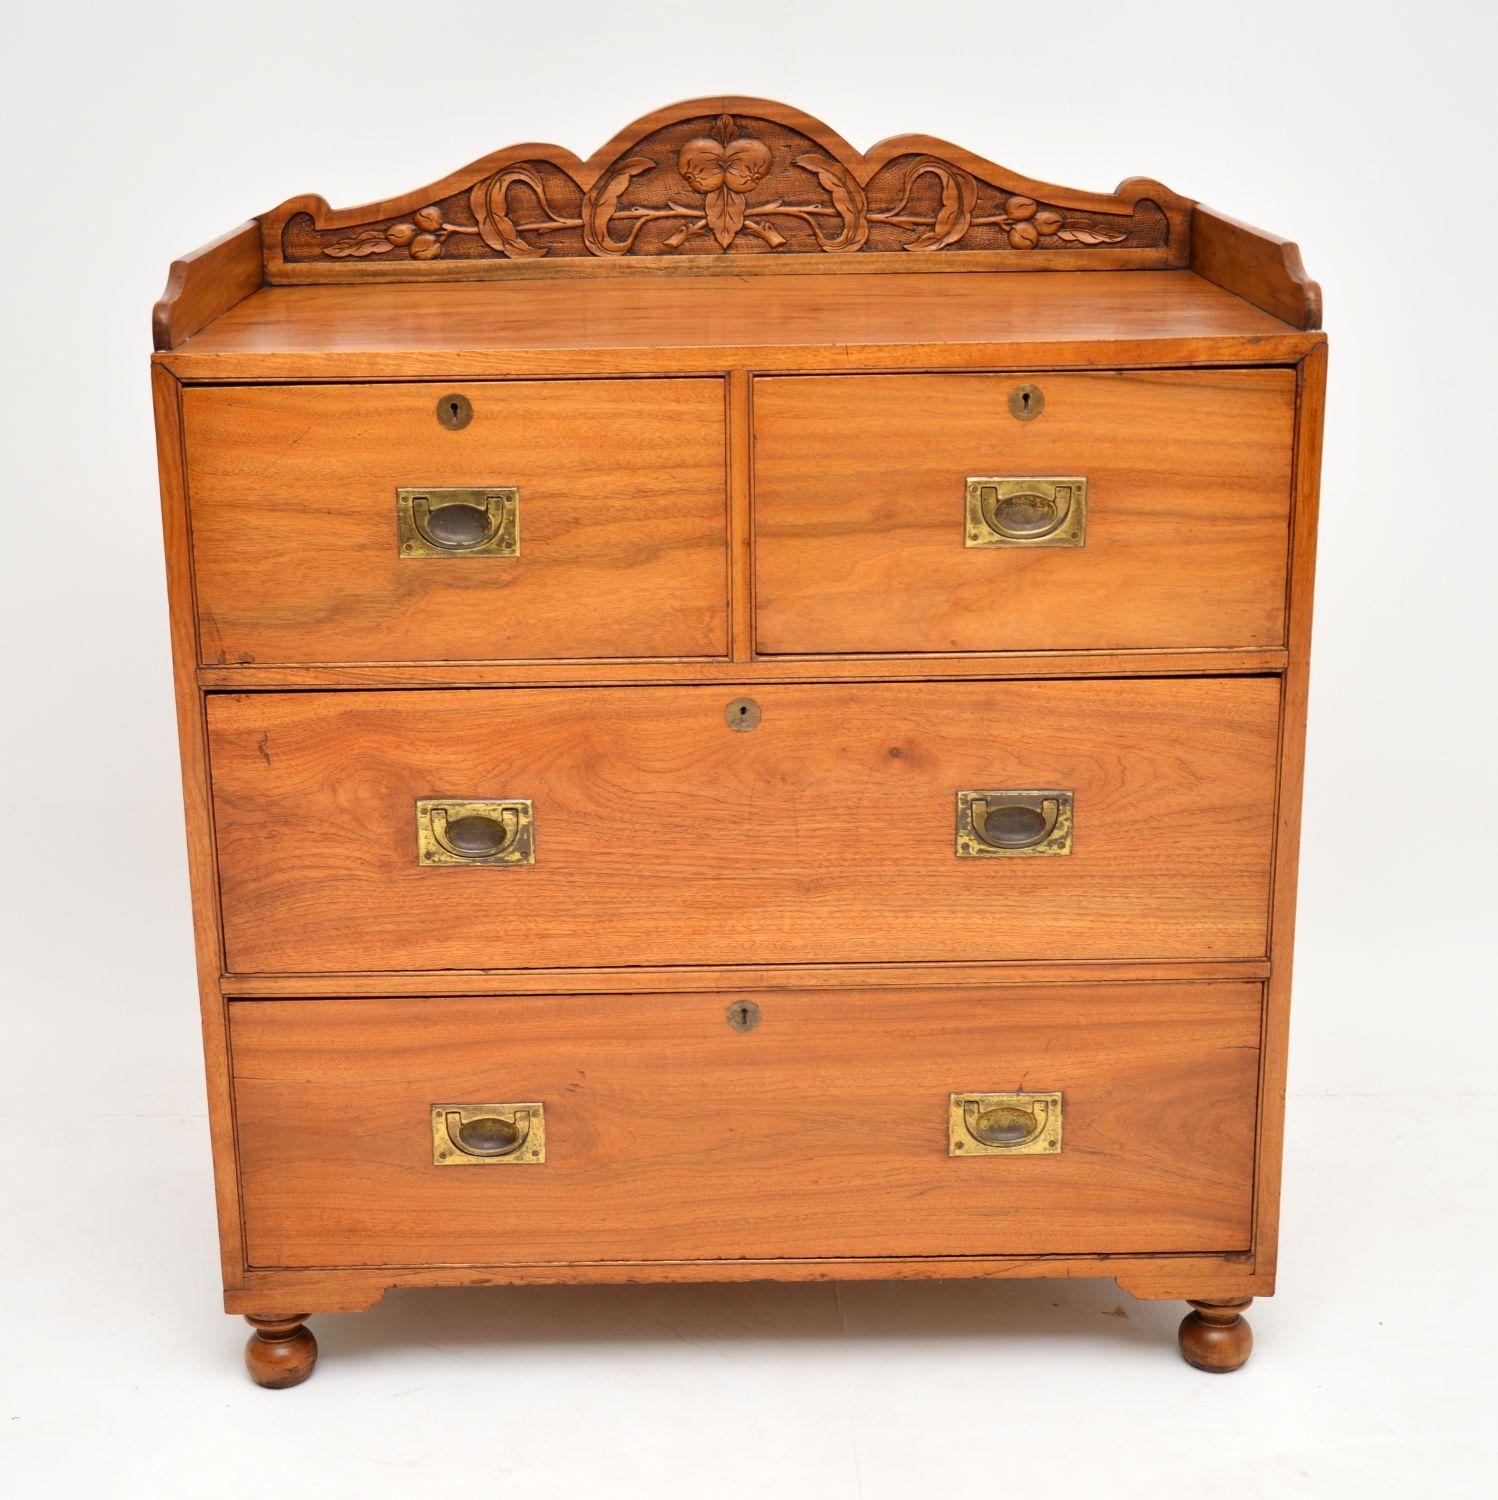 Antique Colonial camphor wood chest of drawers in excellent original condition, with a carved back gallery & side pieces.

Antique Colonial camphor wood chest of drawers in excellent original condition, with a carved back gallery and side